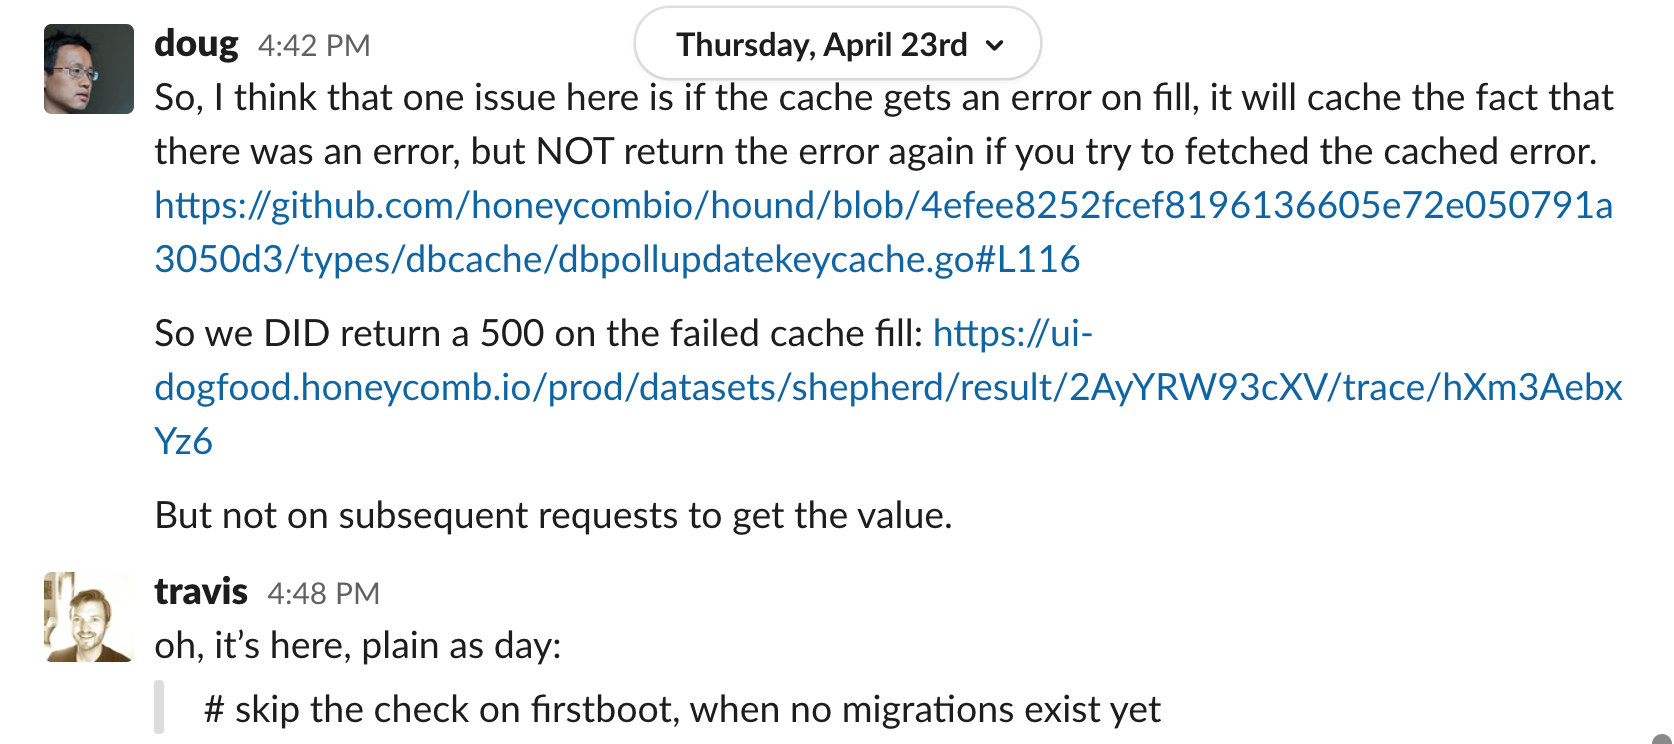 doug 4:42 PM So, I think that one issue here is if the cache gets an error on fill, it will cache the fact that there was an error, but NOT return the error again if you try to fetched the cached error. (link to line of code in github.) So we DID return a 500 on the failed cache fill: (link to honeycomb dogfood trace.) But not on subsequent requests to get the value. travis 4:48 PM oh, it’s here, plain as day: (blockquote) # skip the check on firstboot, when no migrations exist yet